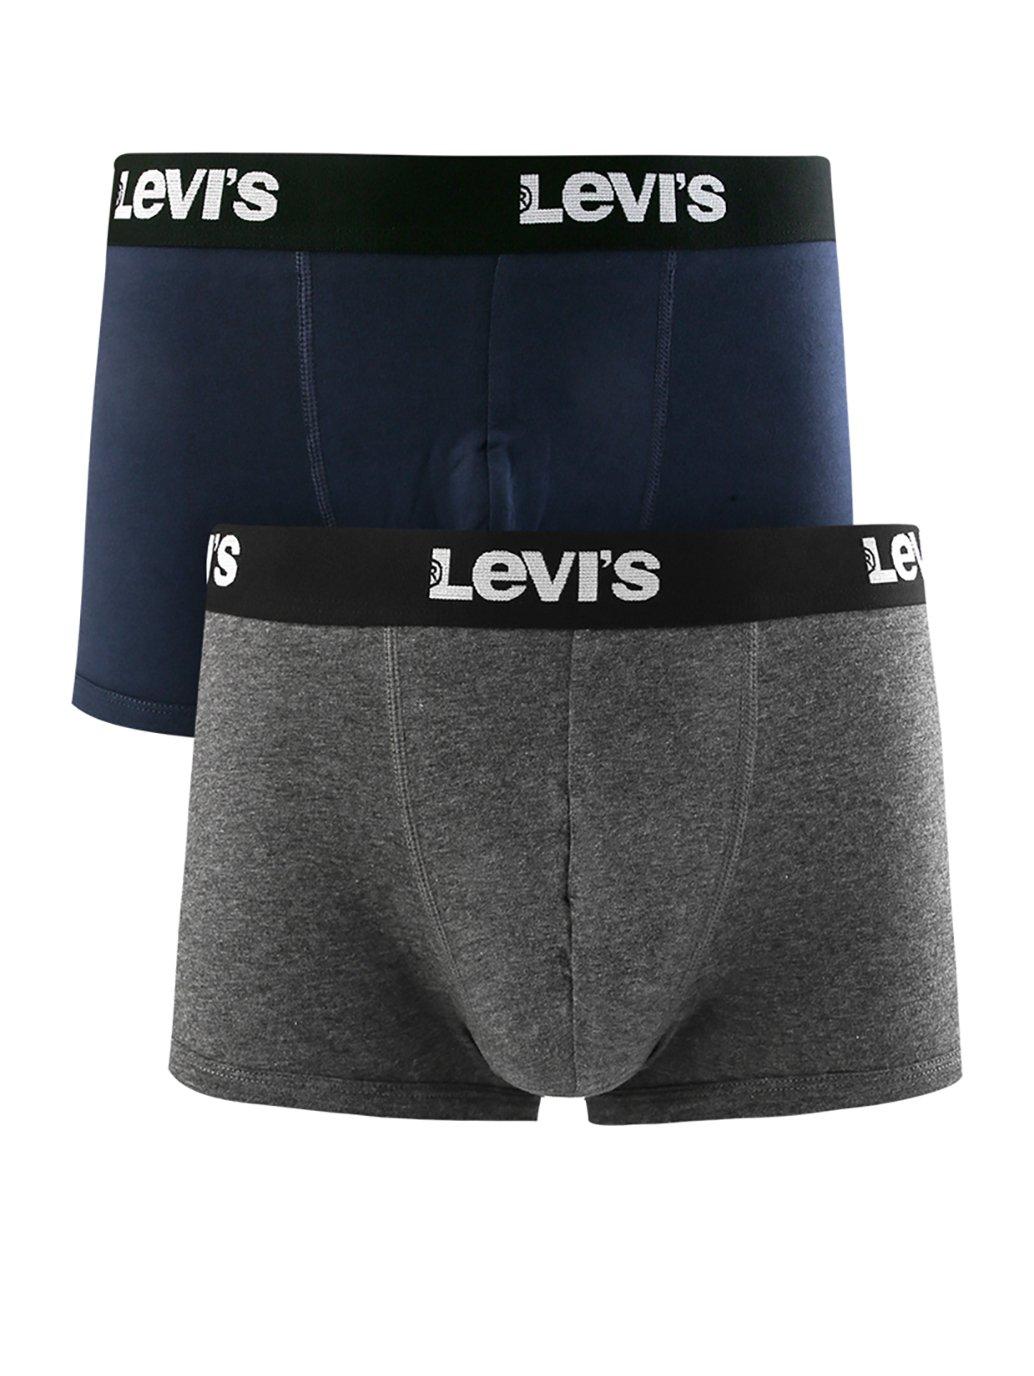 levis malaysia trunks 876190081 03 Side